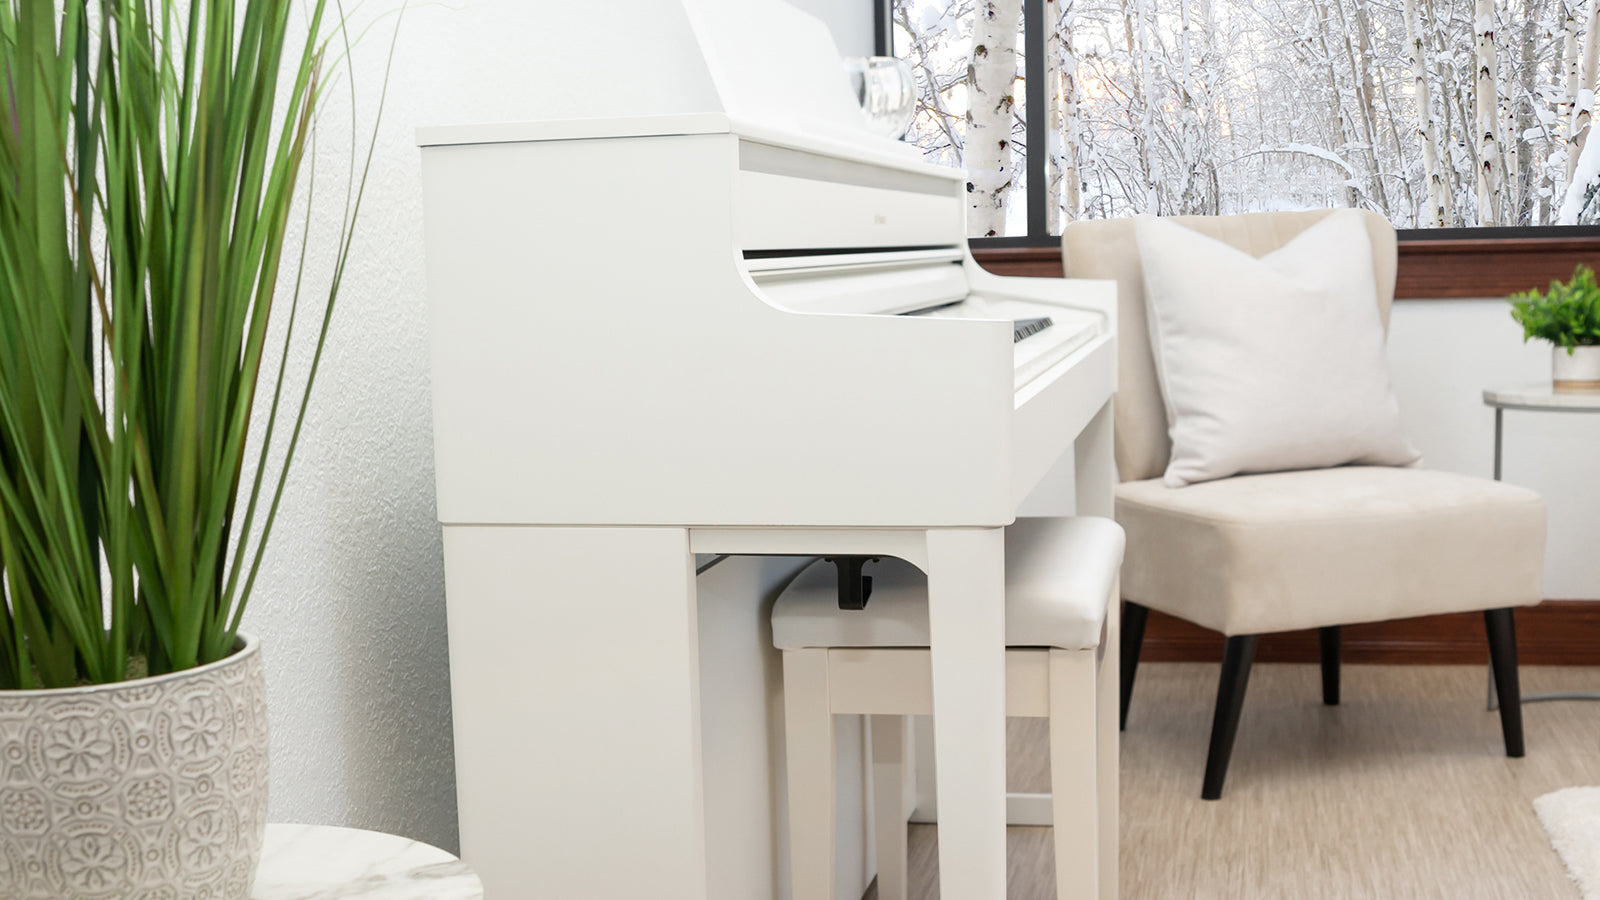 A Roland digital piano in a stylish living room